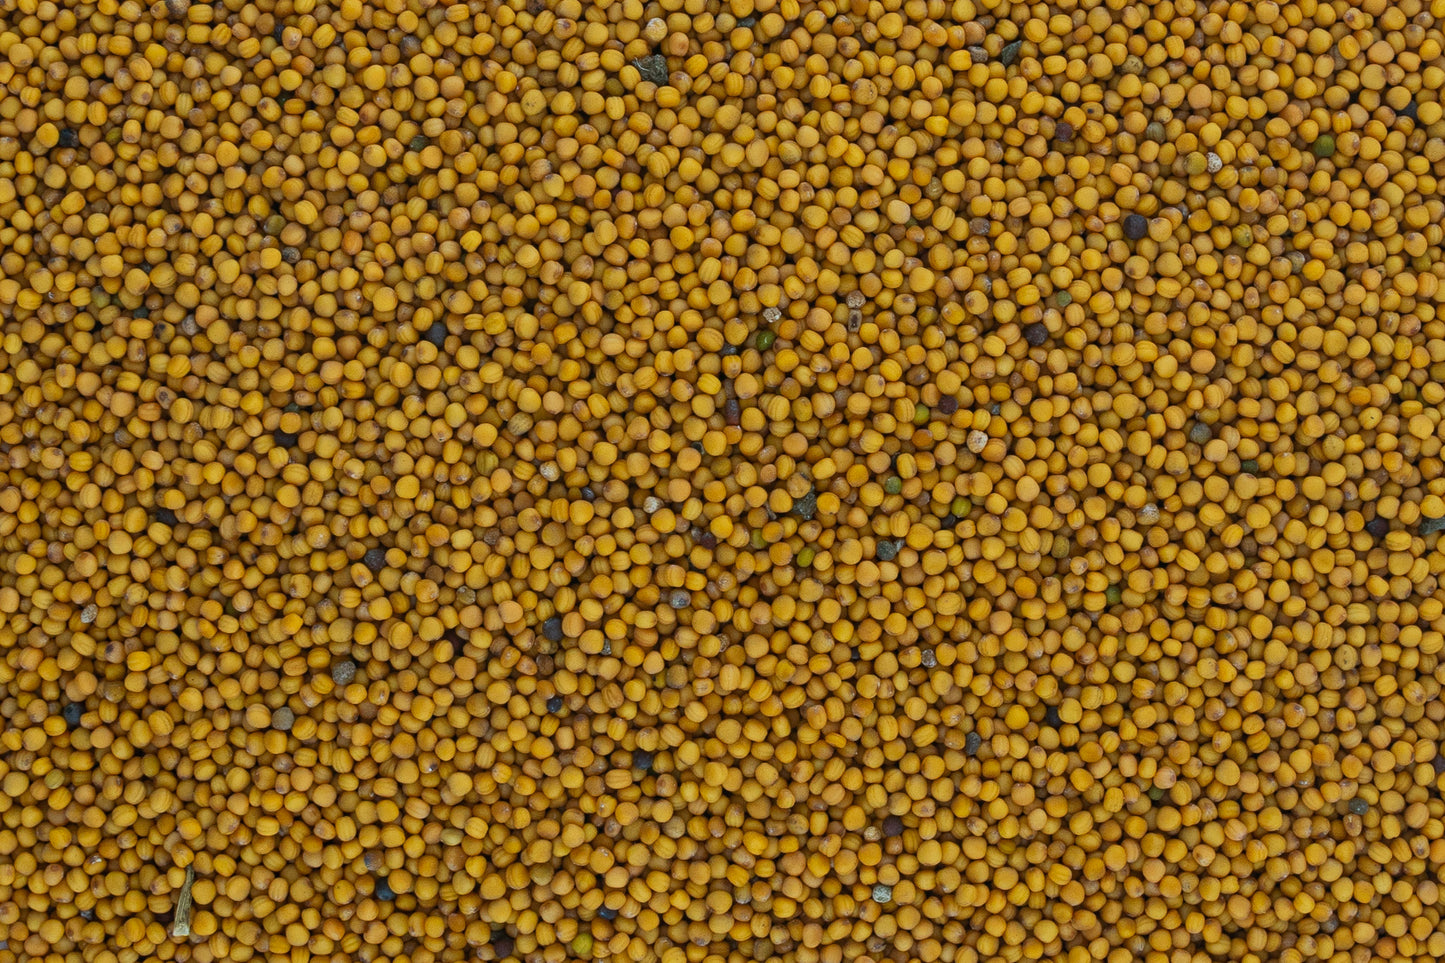 White Mustard Seed from West Bengal